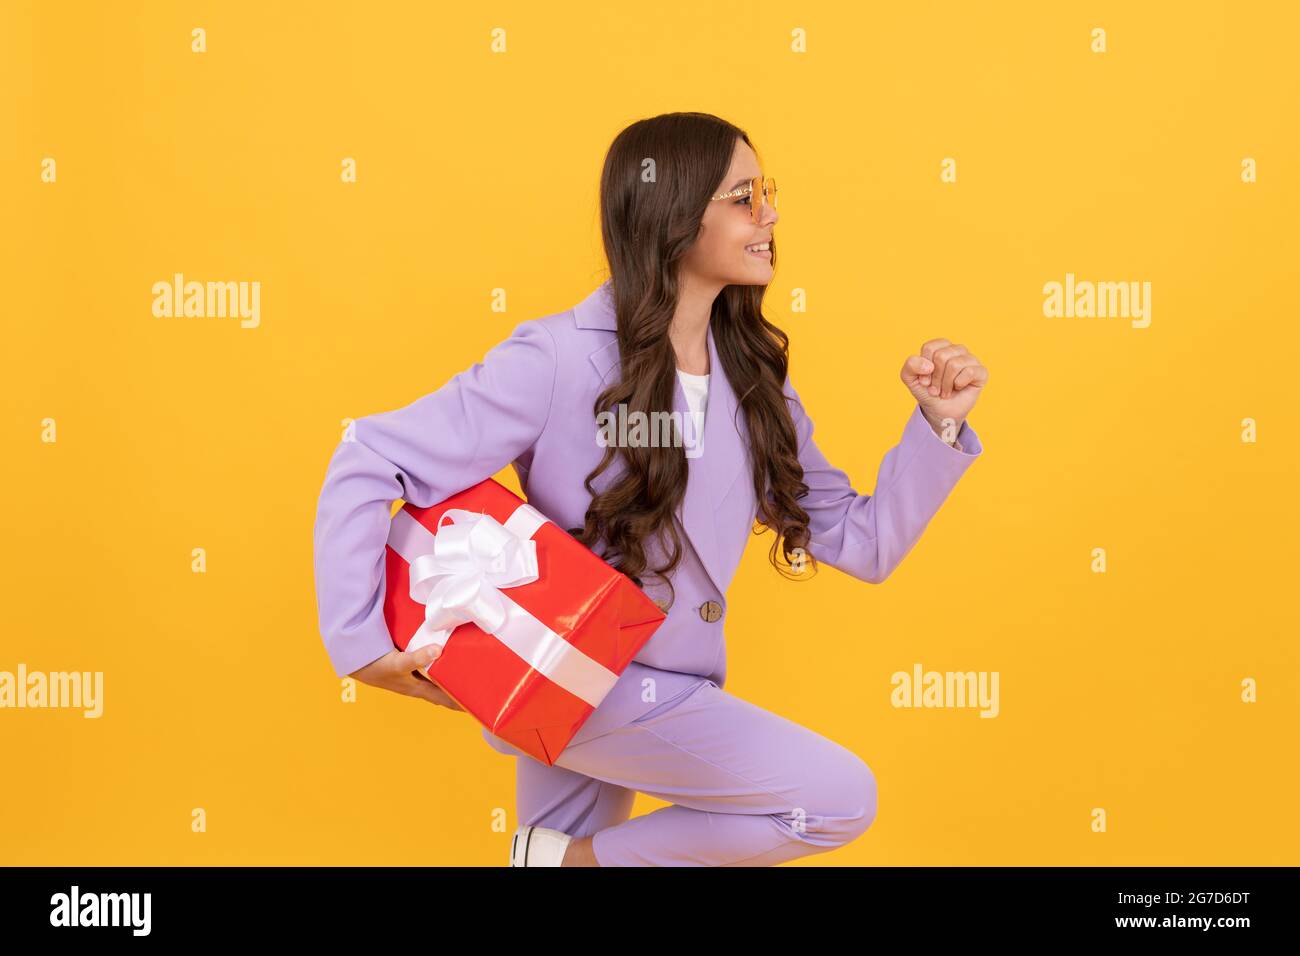 shopping final sell out. teenage shopper. hurry up. stylish teen girl running with gift box Stock Photo